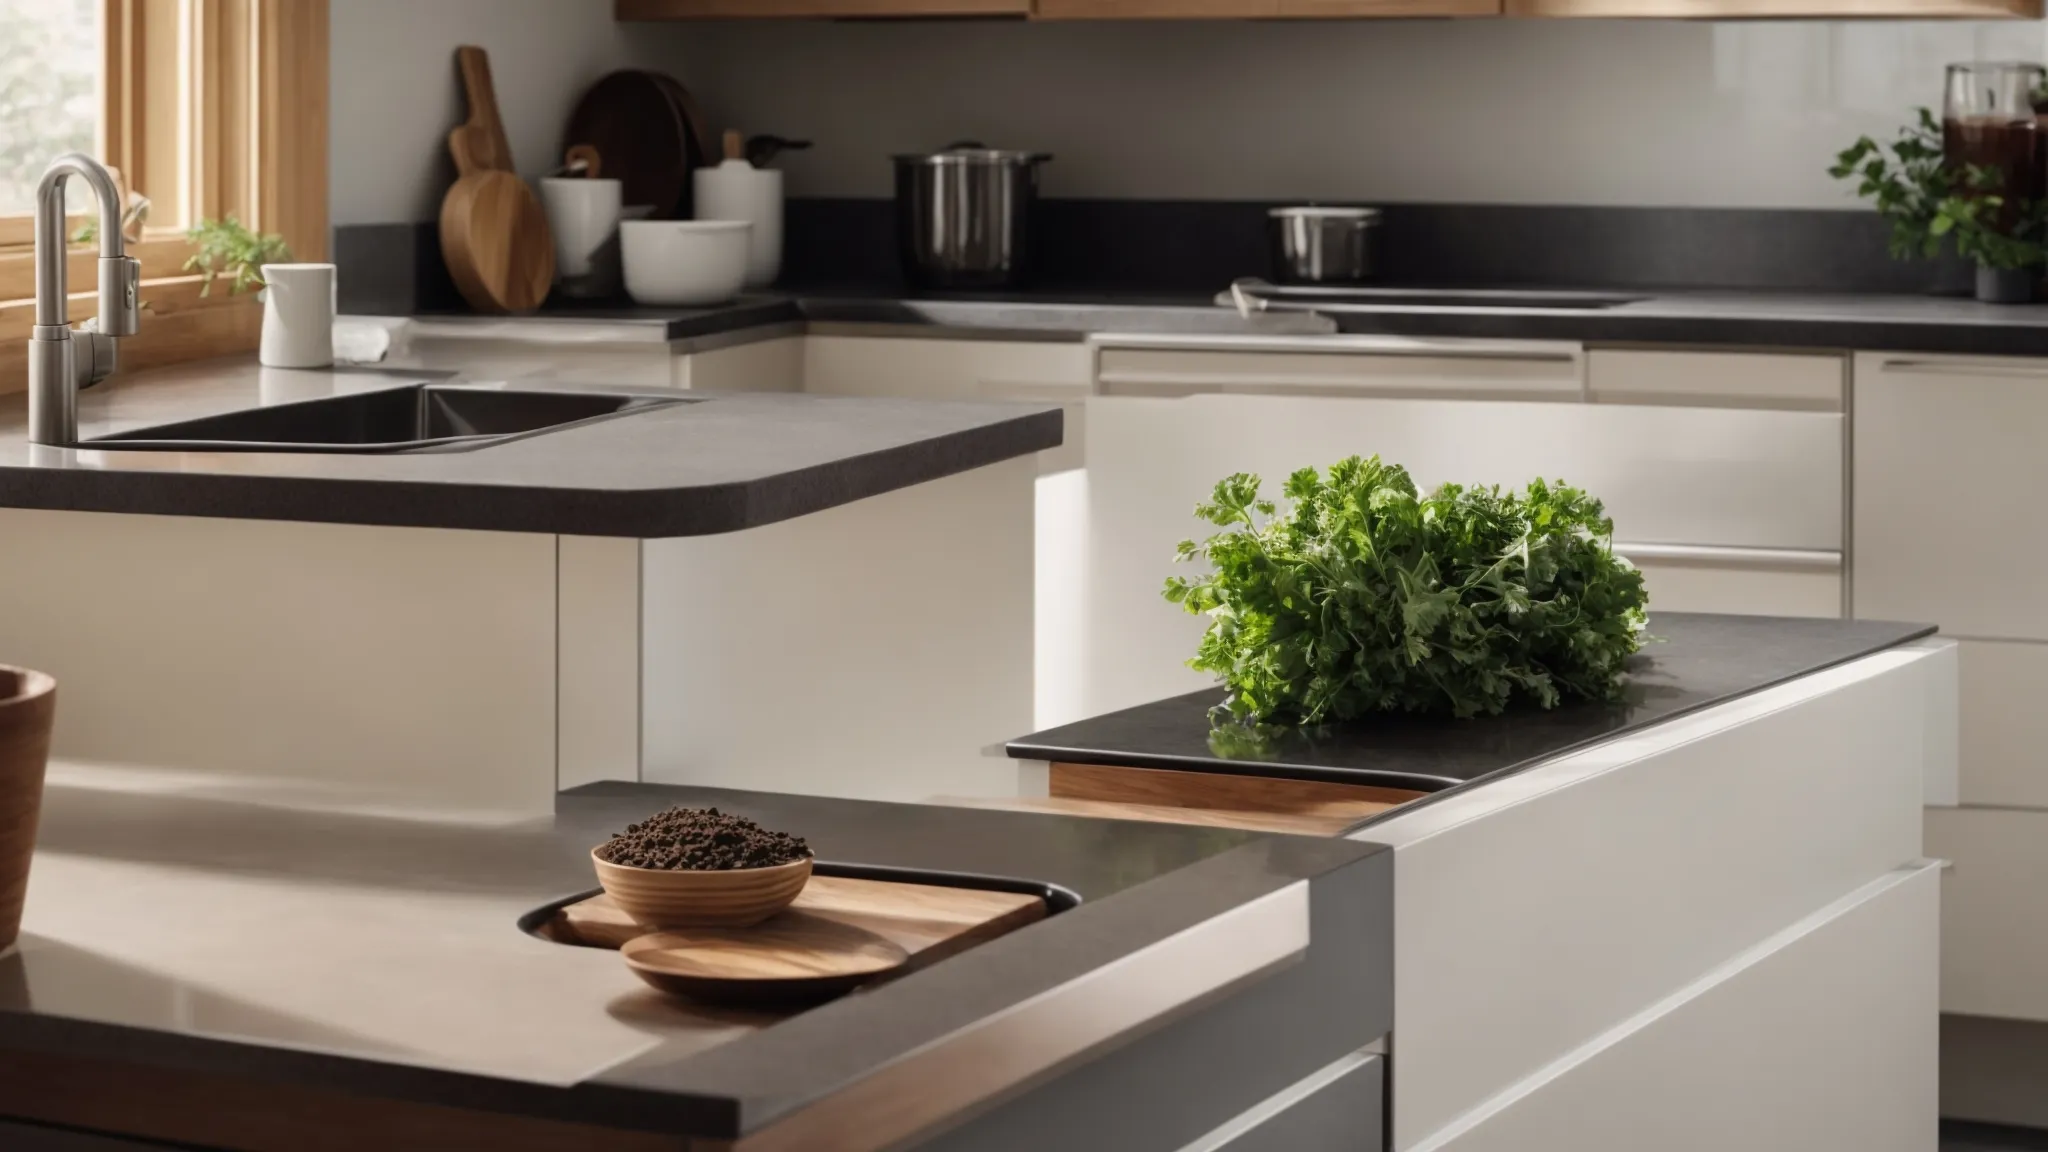 a sleek kitchen countertop with an integrated compost bin.